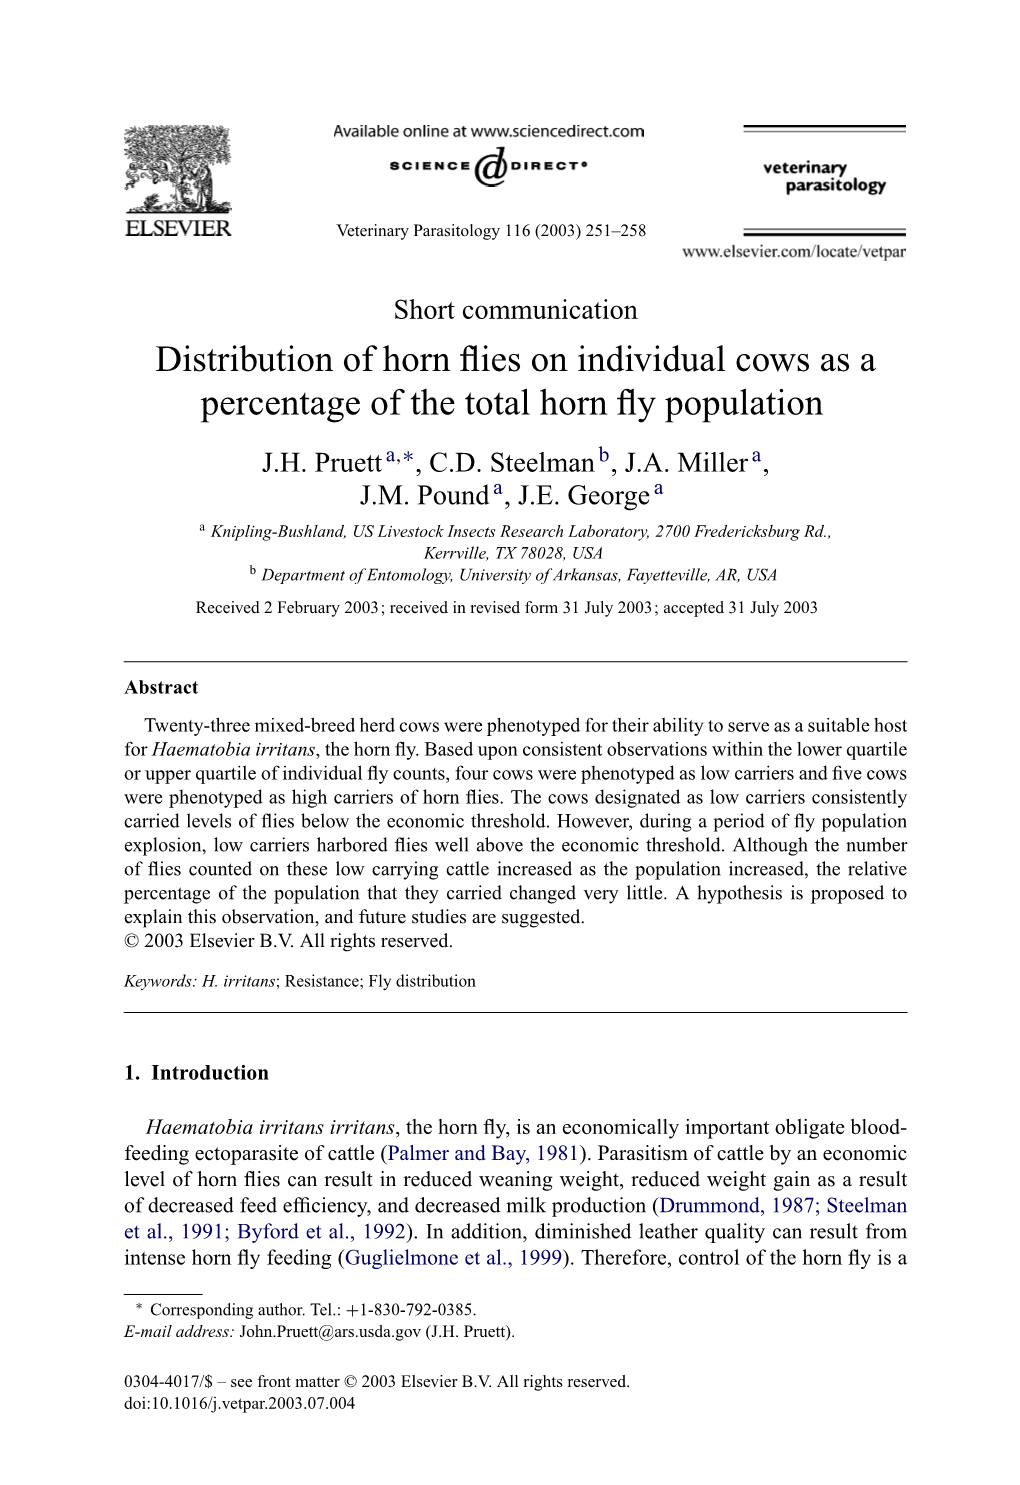 Distribution of Horn Flies on Individual Cows As a Percentage of the Total